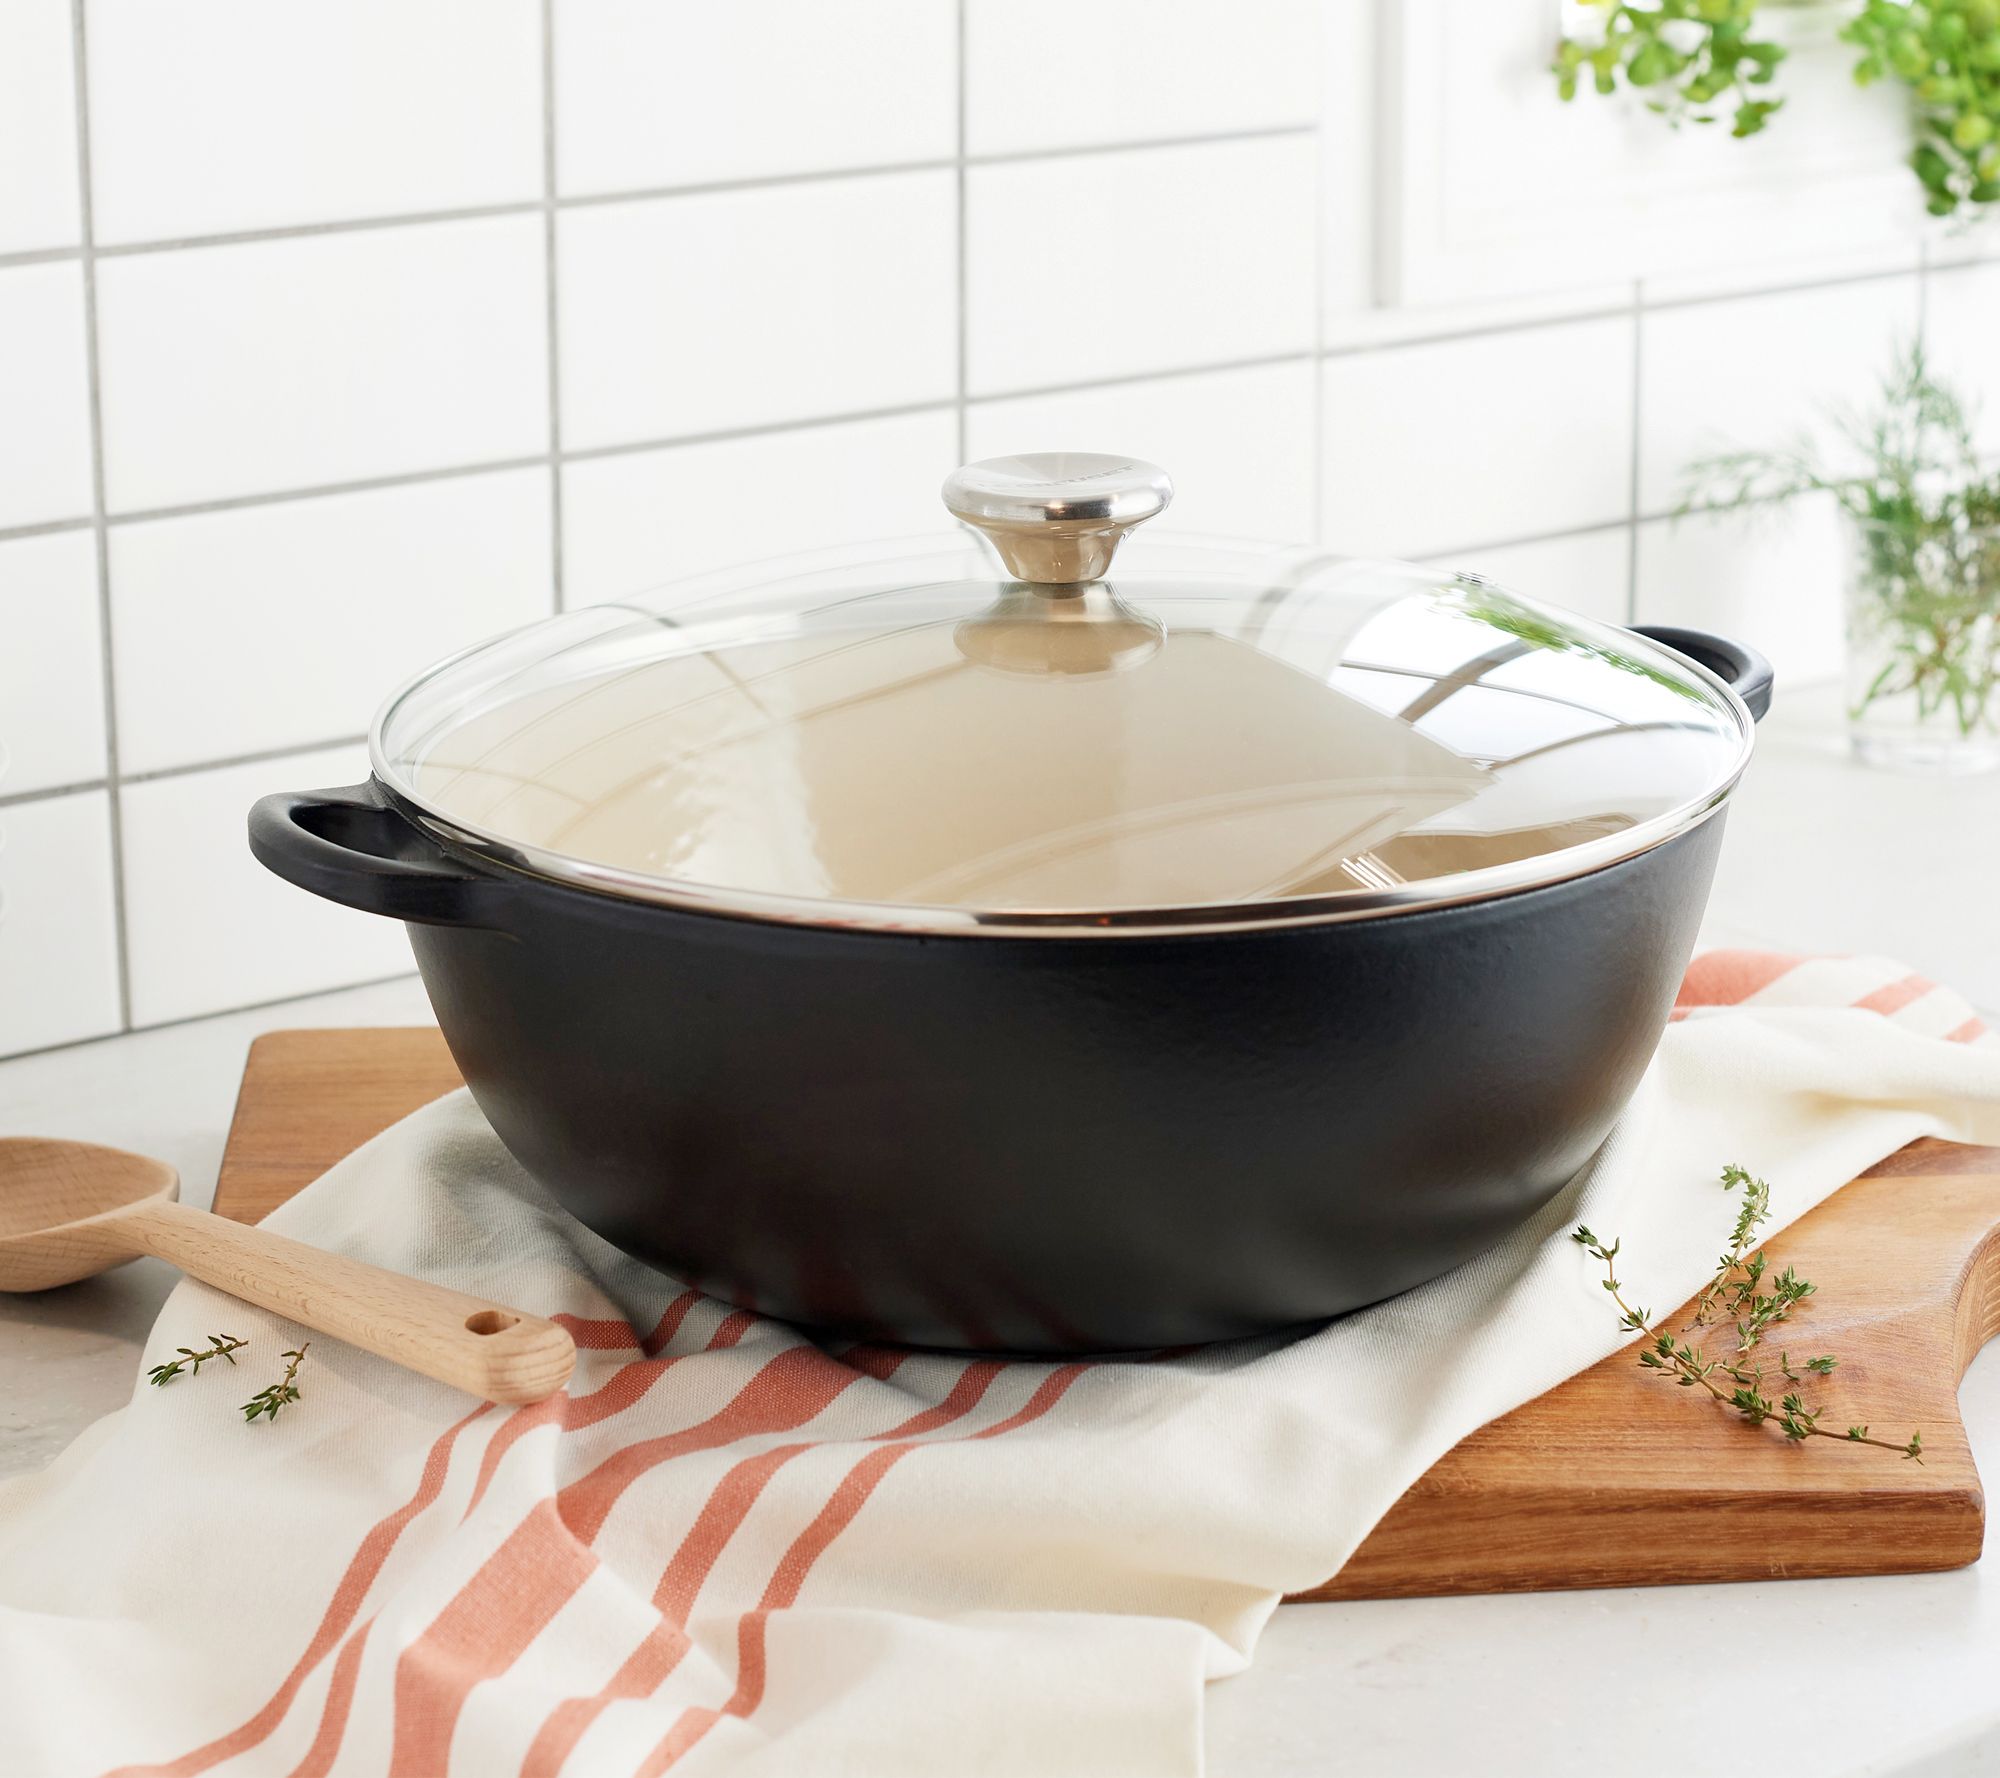 This Le Creuset Pot Has a Smart See-Through Lid, and It's Nearly